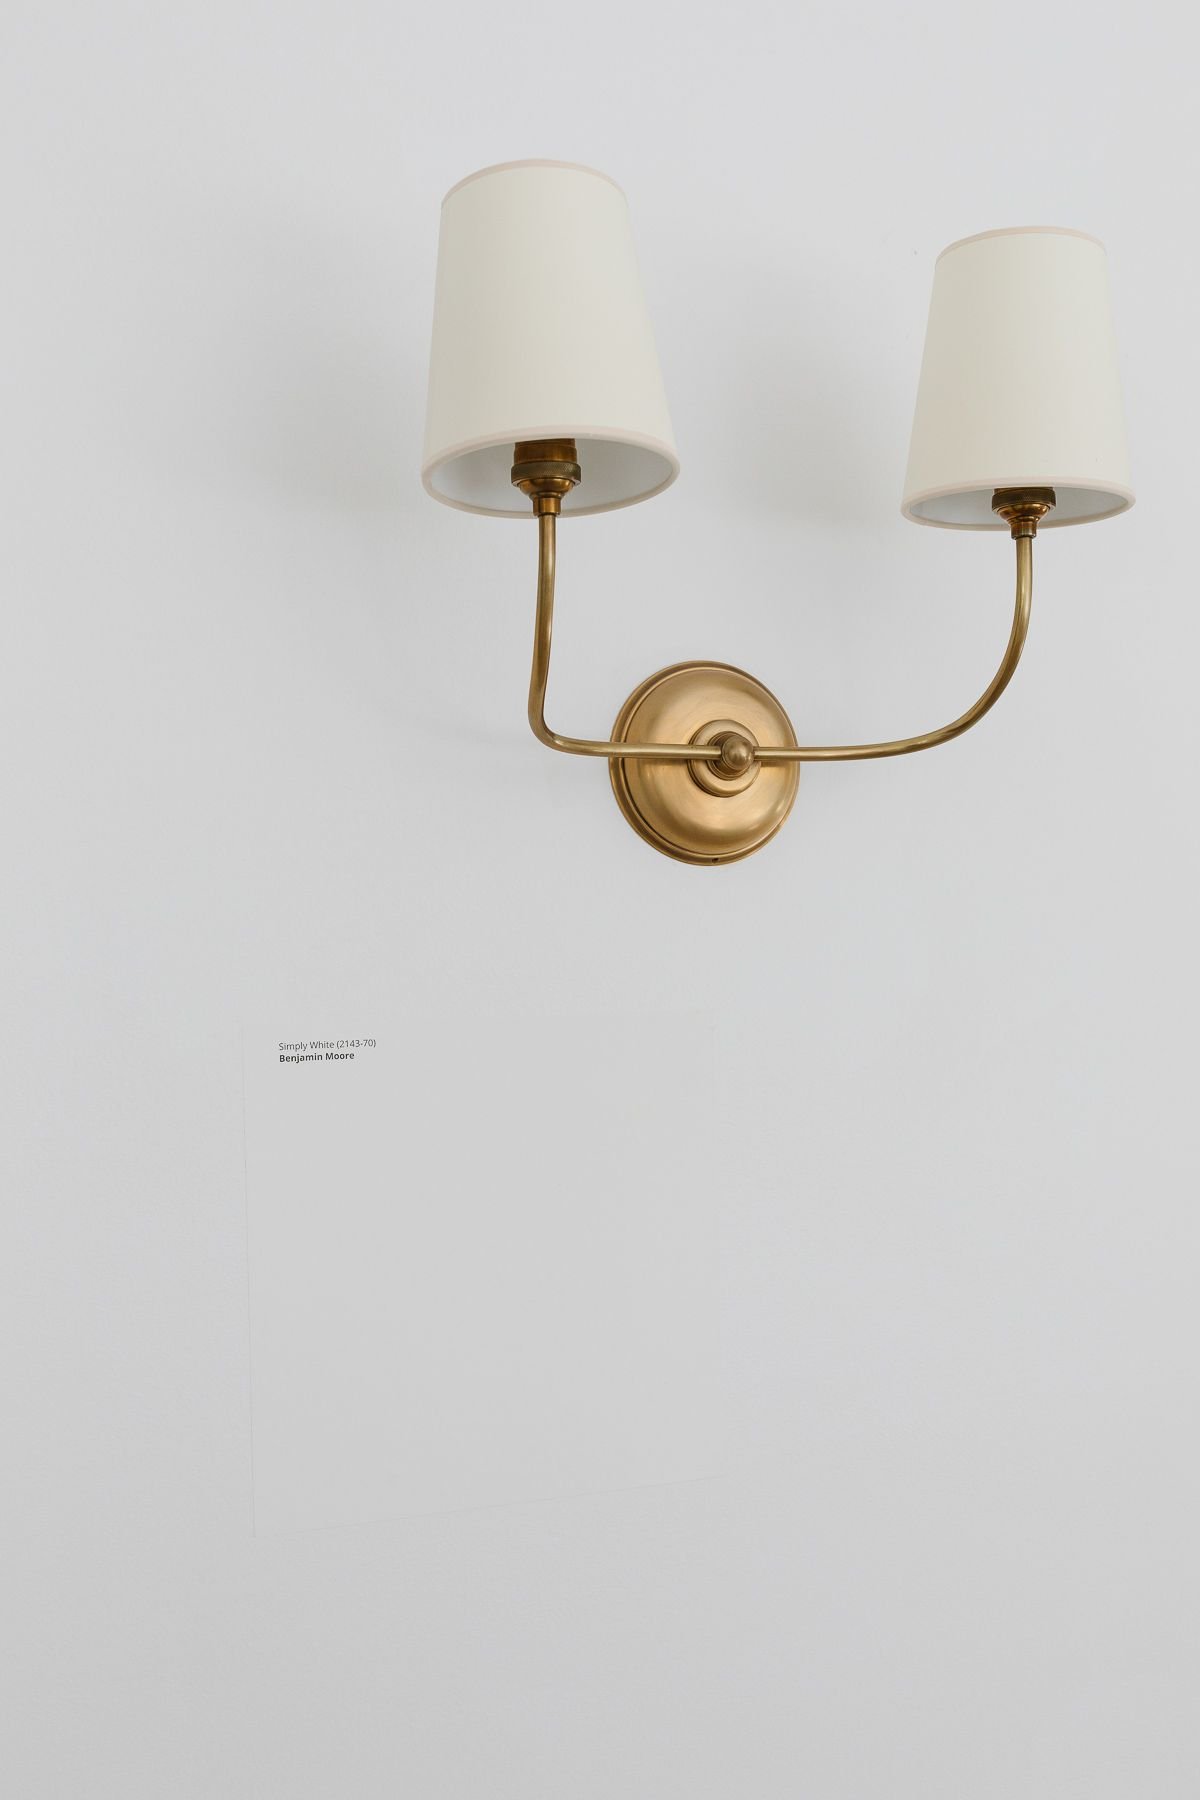 A Samplize paint sample on a white wall with a brass wall sconce above